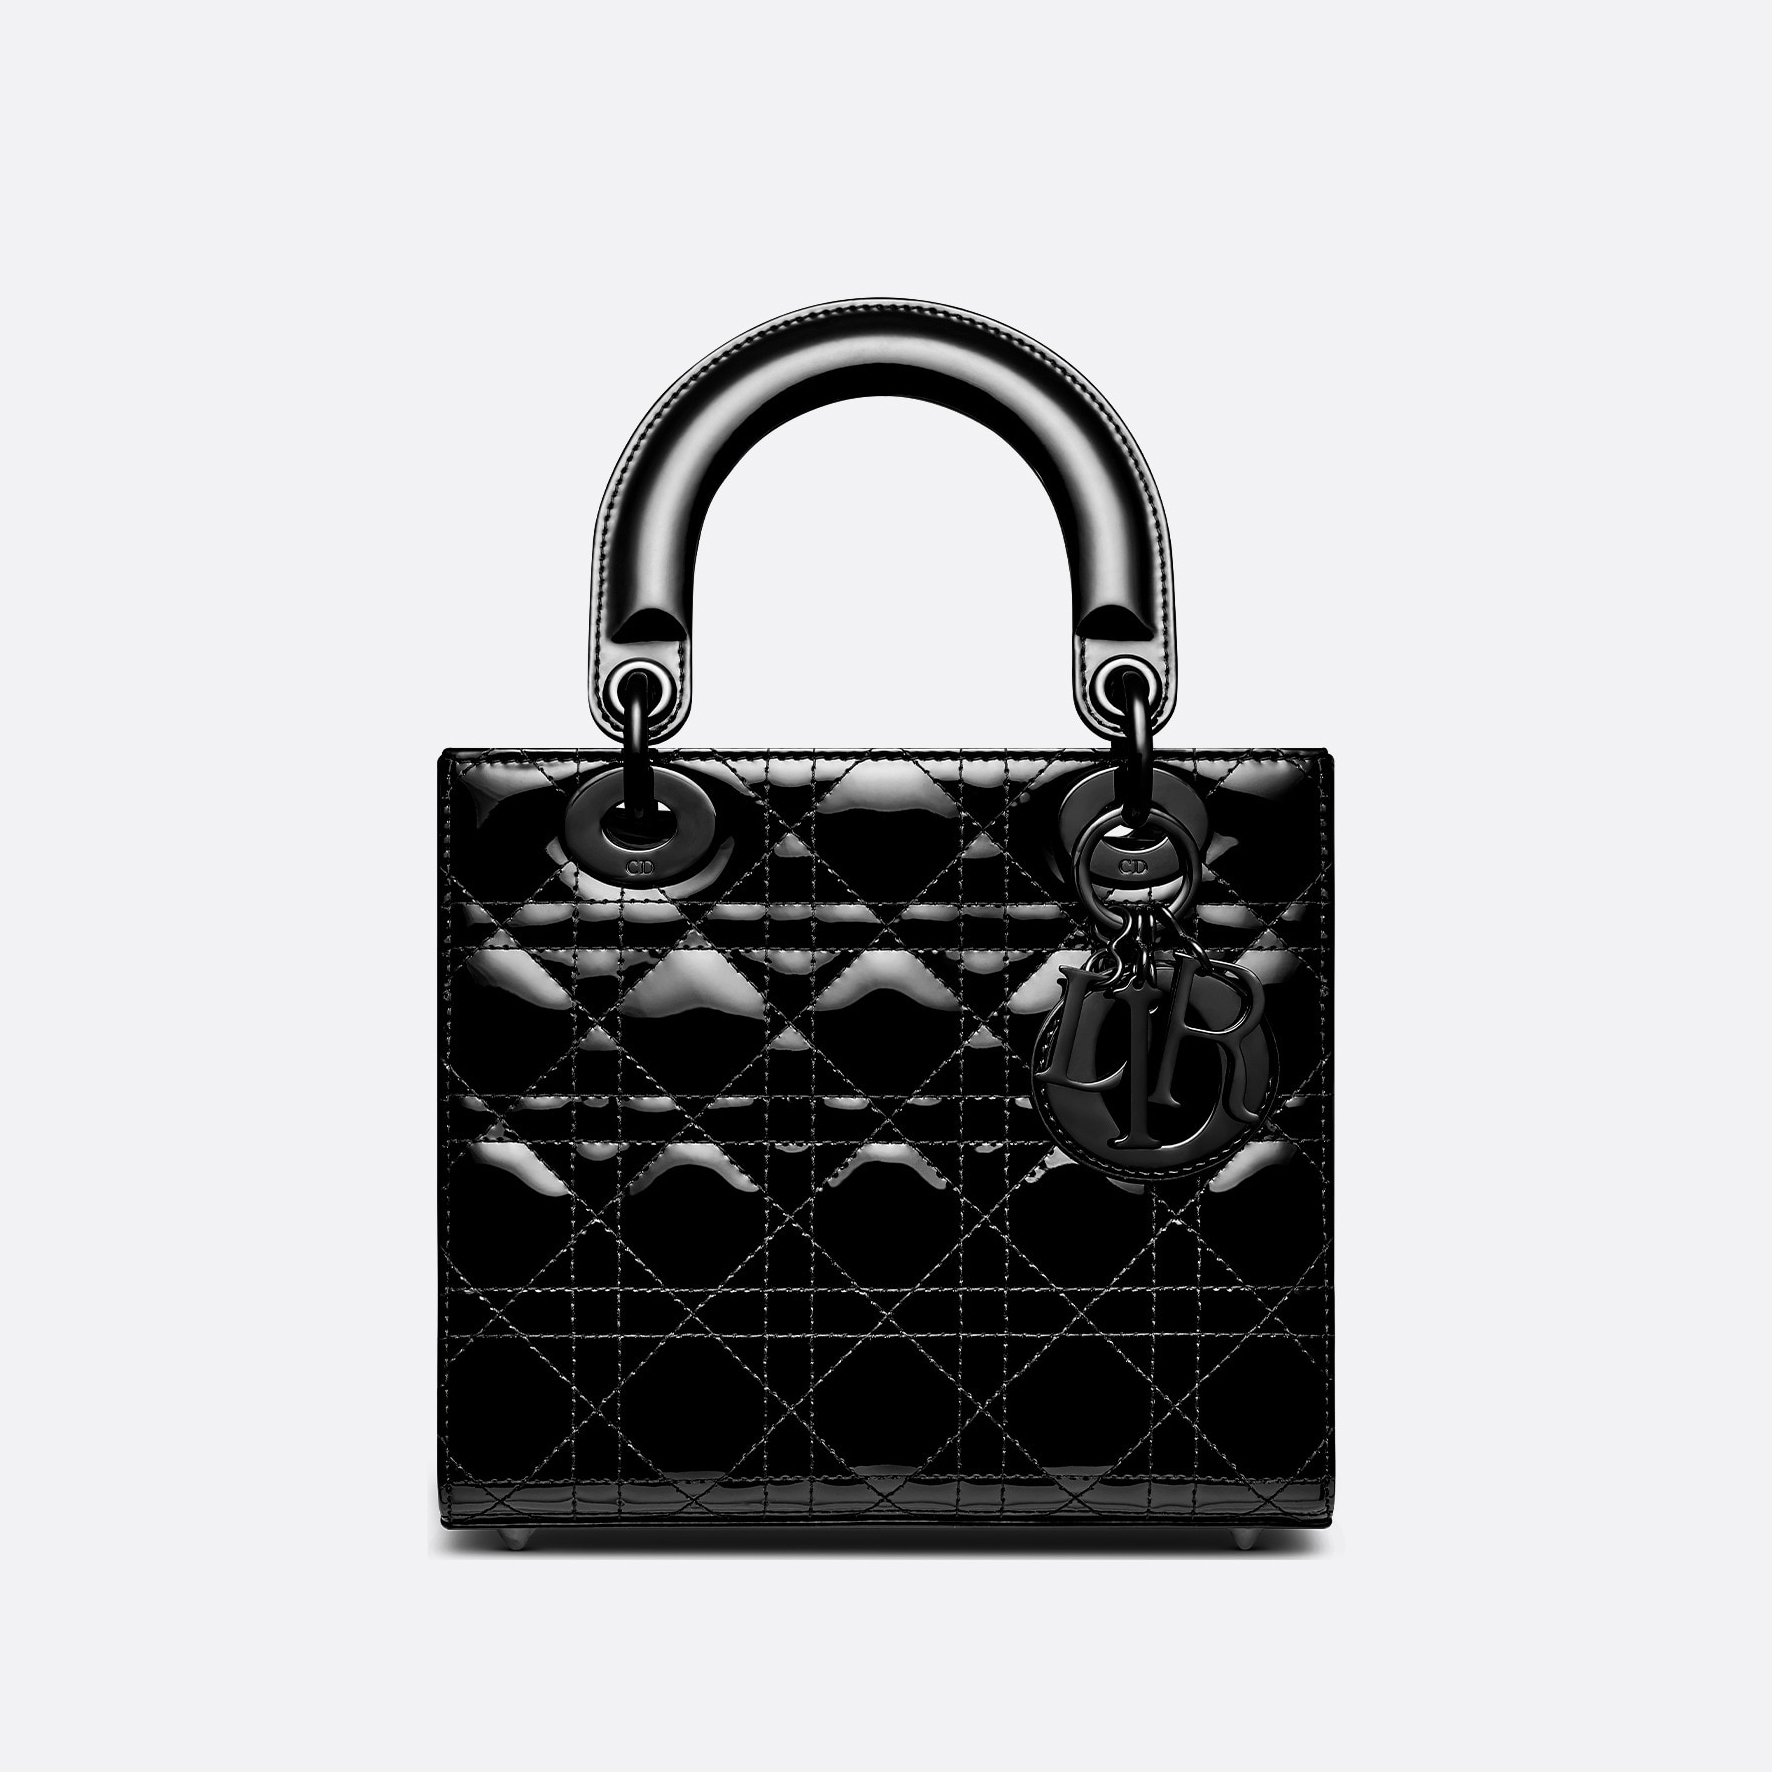 10 most popular Dior bags worth the investment in 2022